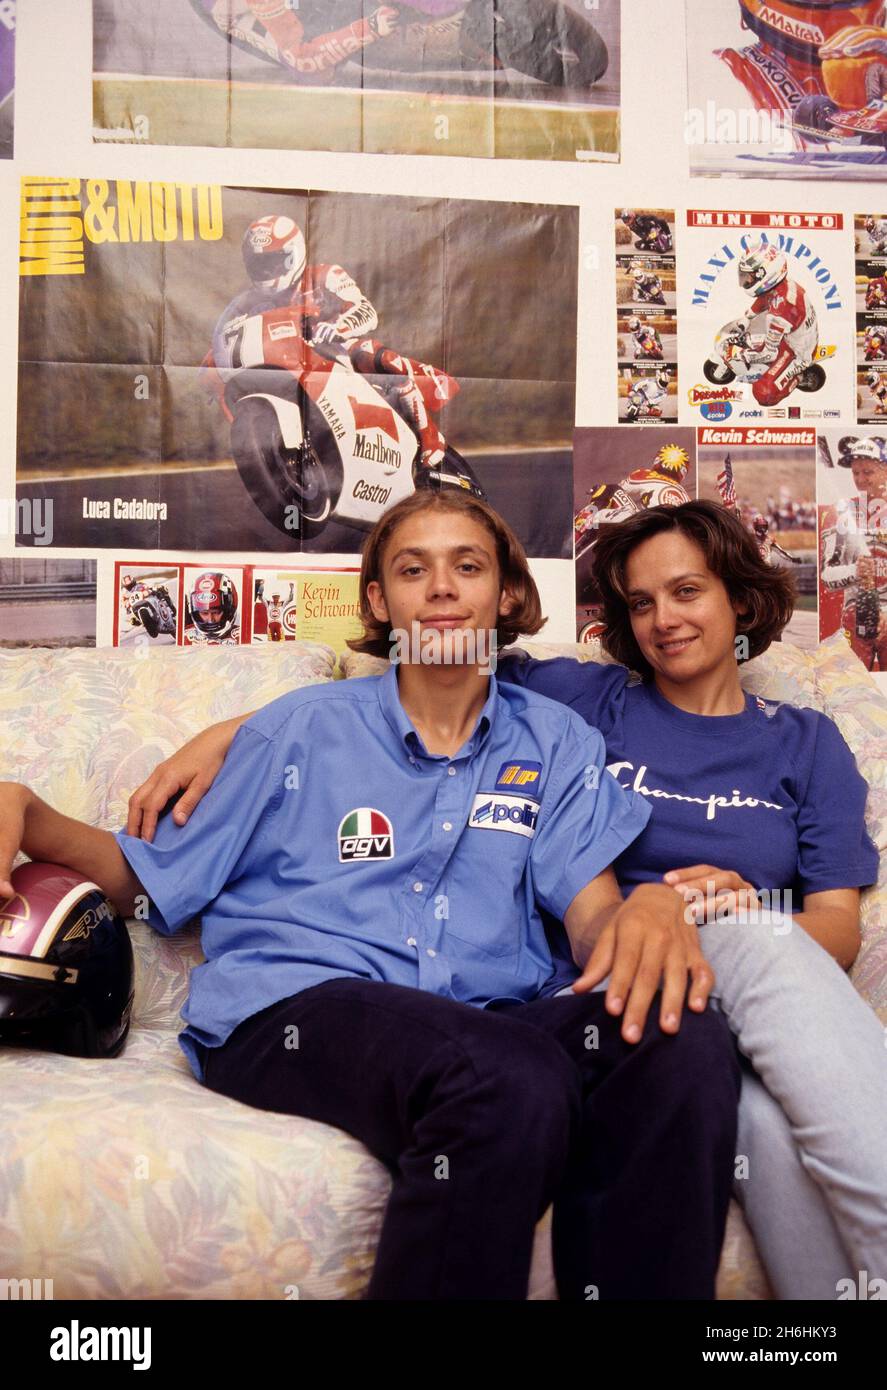 Milan, Italy. 15th Nov, 2000. Milan, archive of the 90s in the photo: Valentino  Rossi in a photo shoot in the early years of his career, in the photo with  his mother,